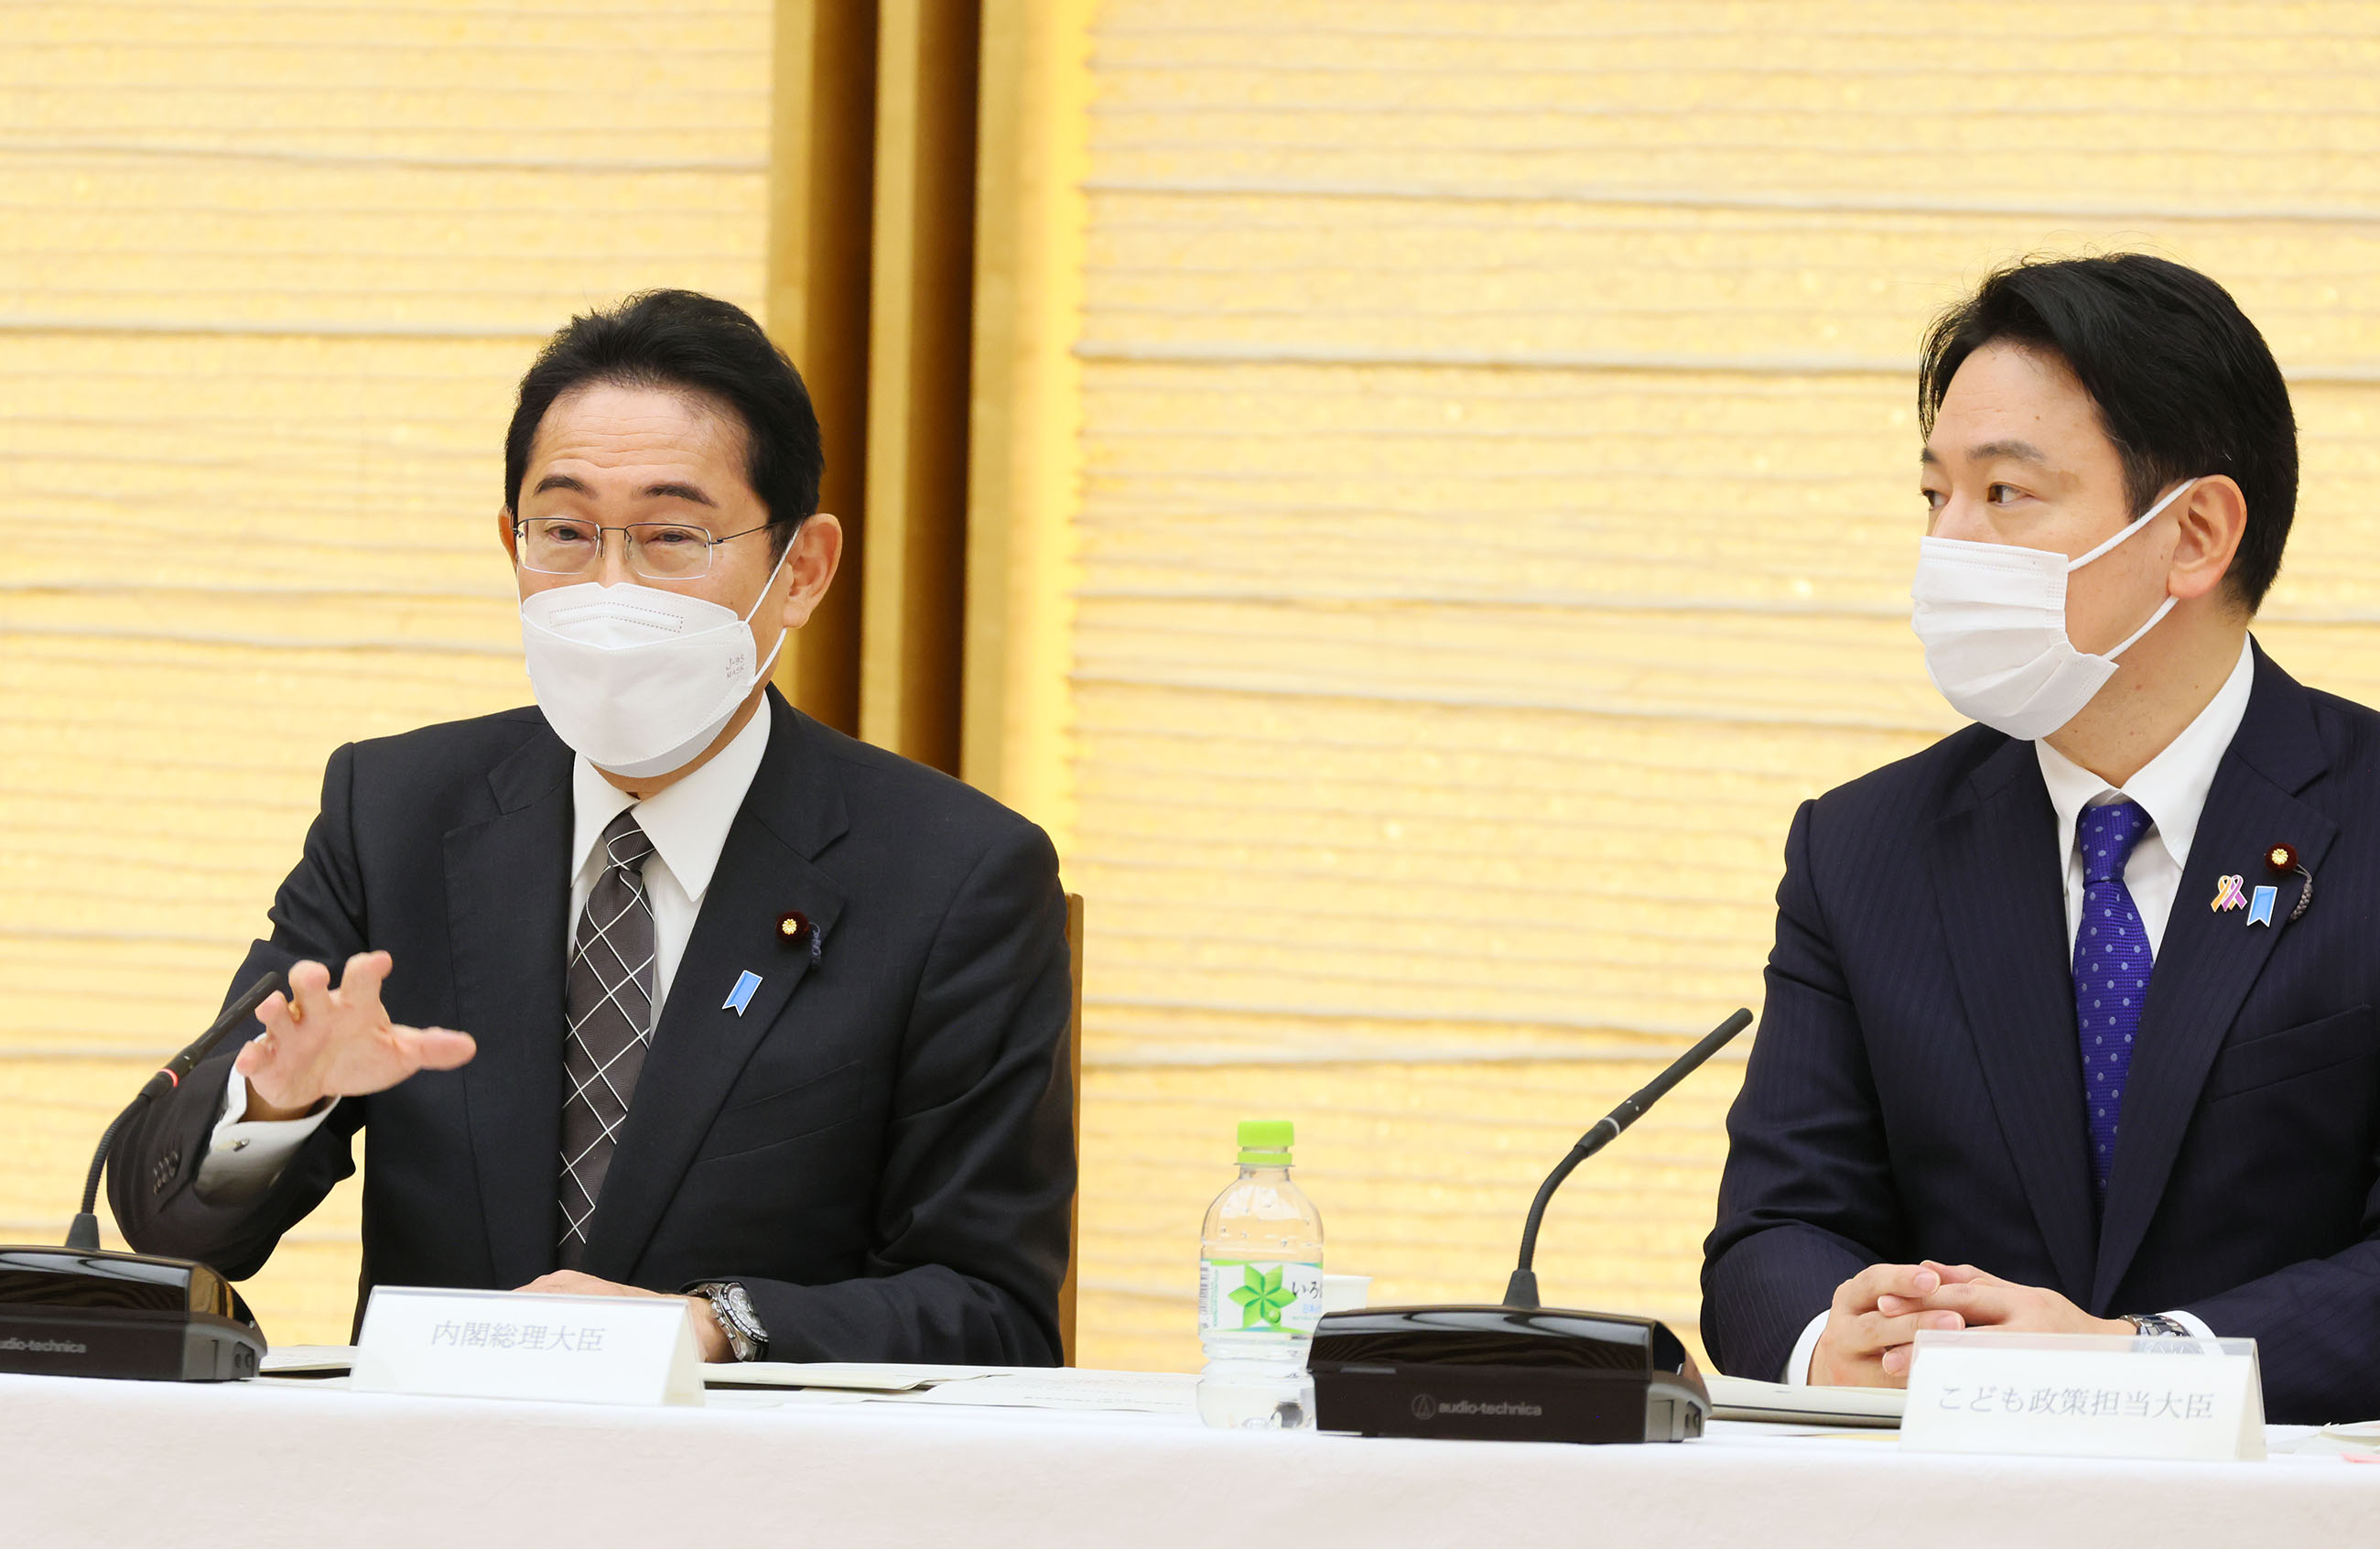 Prime Minister Kishida hearing from experts in public hearing (5)